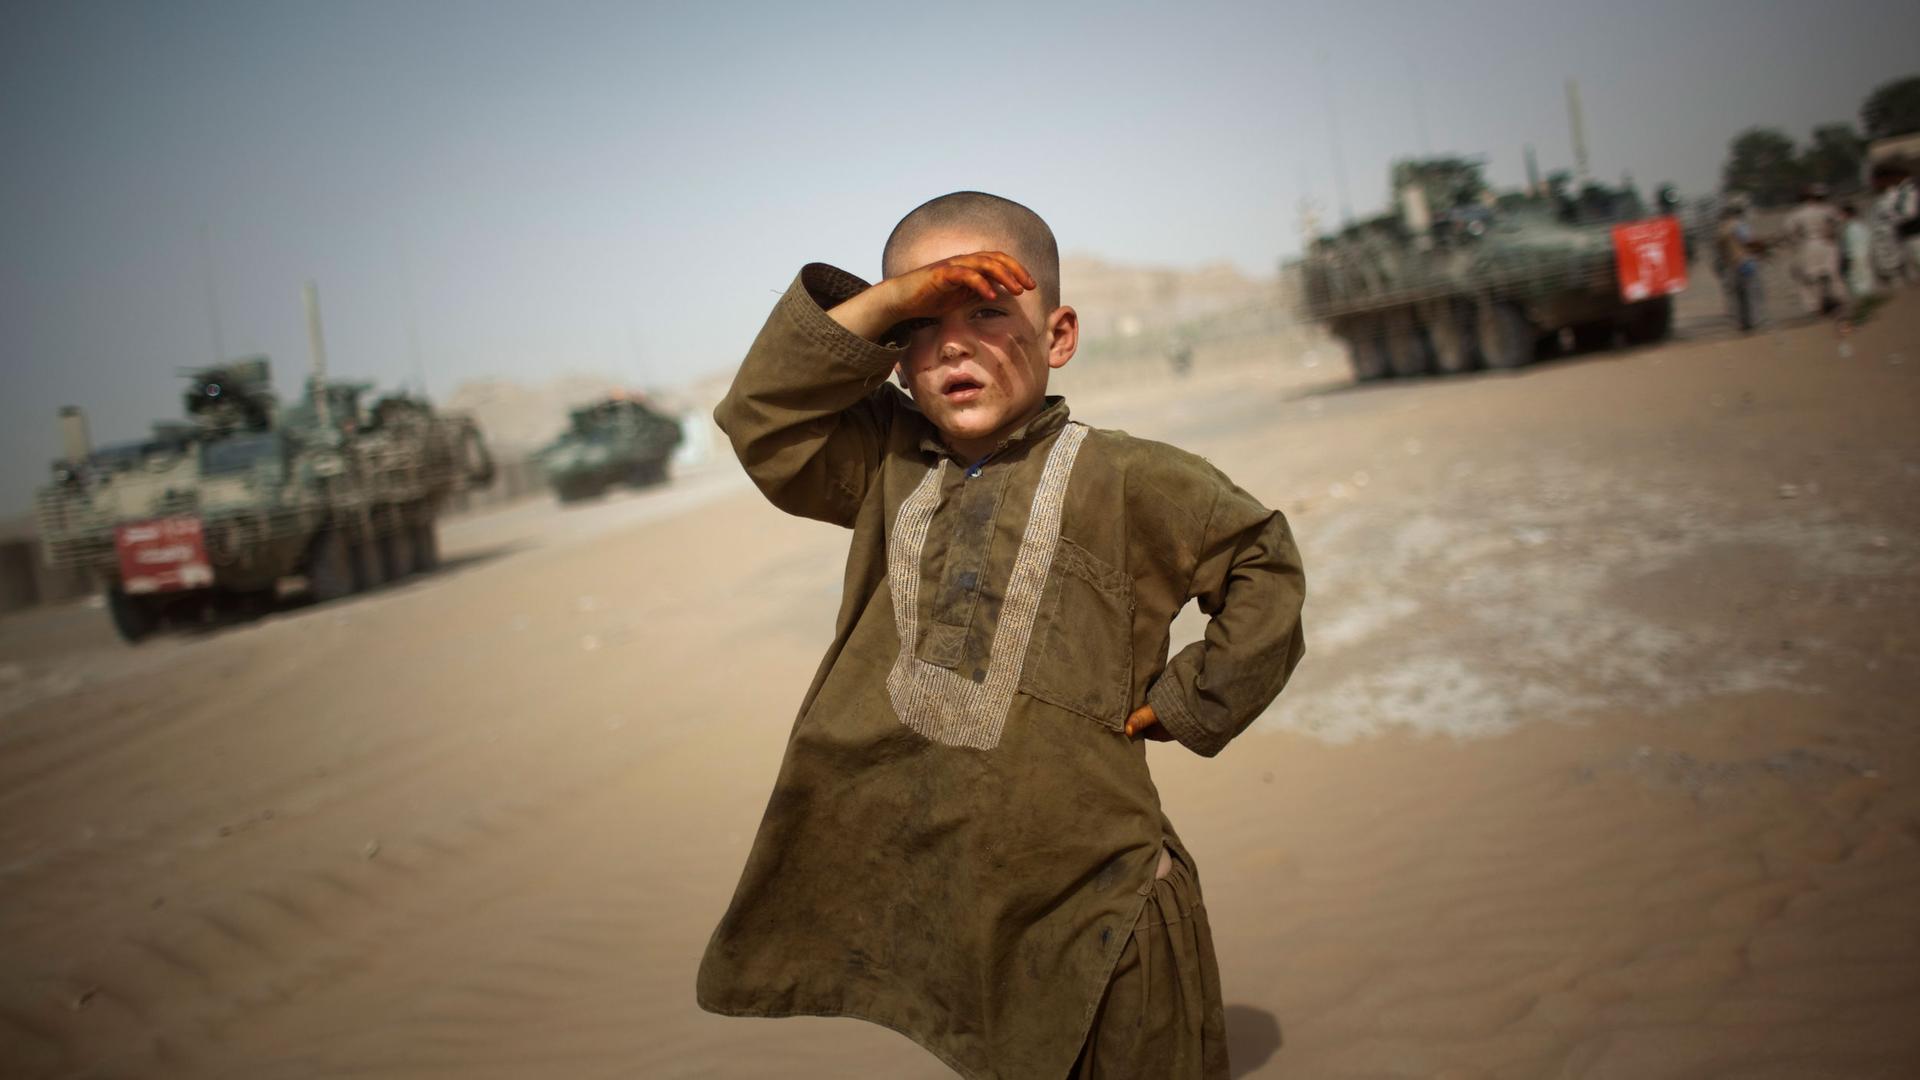 A young boy is shown with his right hand up to his face shielding the sun with armored military vehicles shown in the distance.